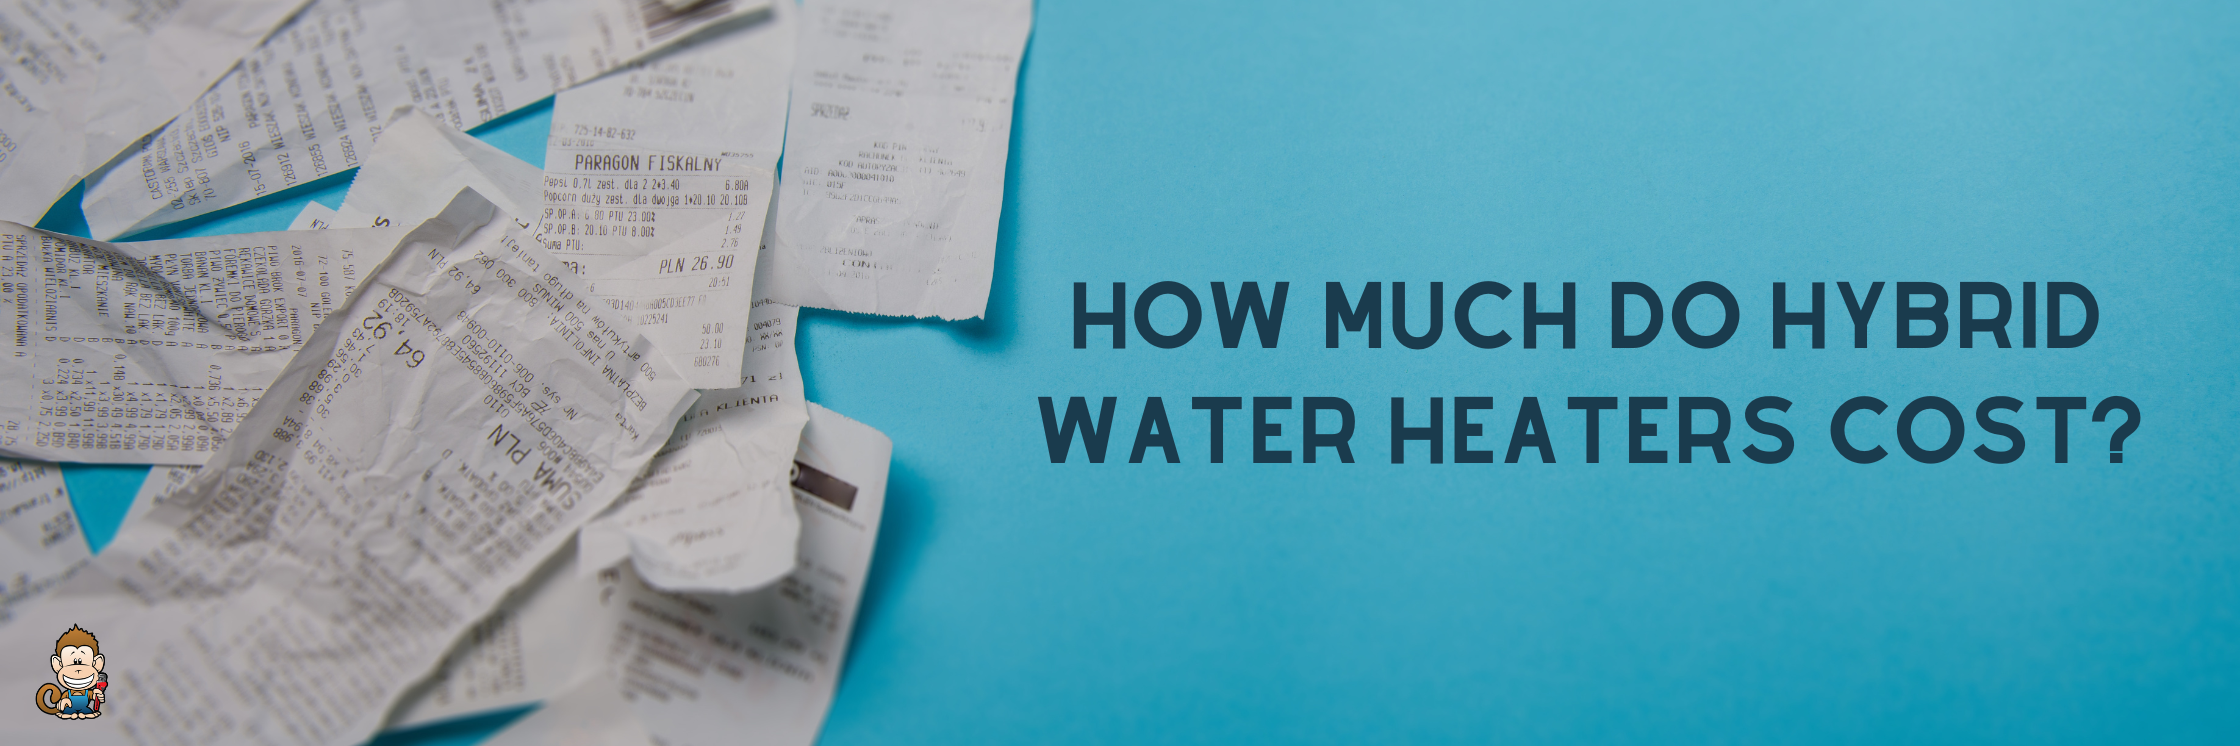 How Much Do Hybrid Water Heaters Cost?